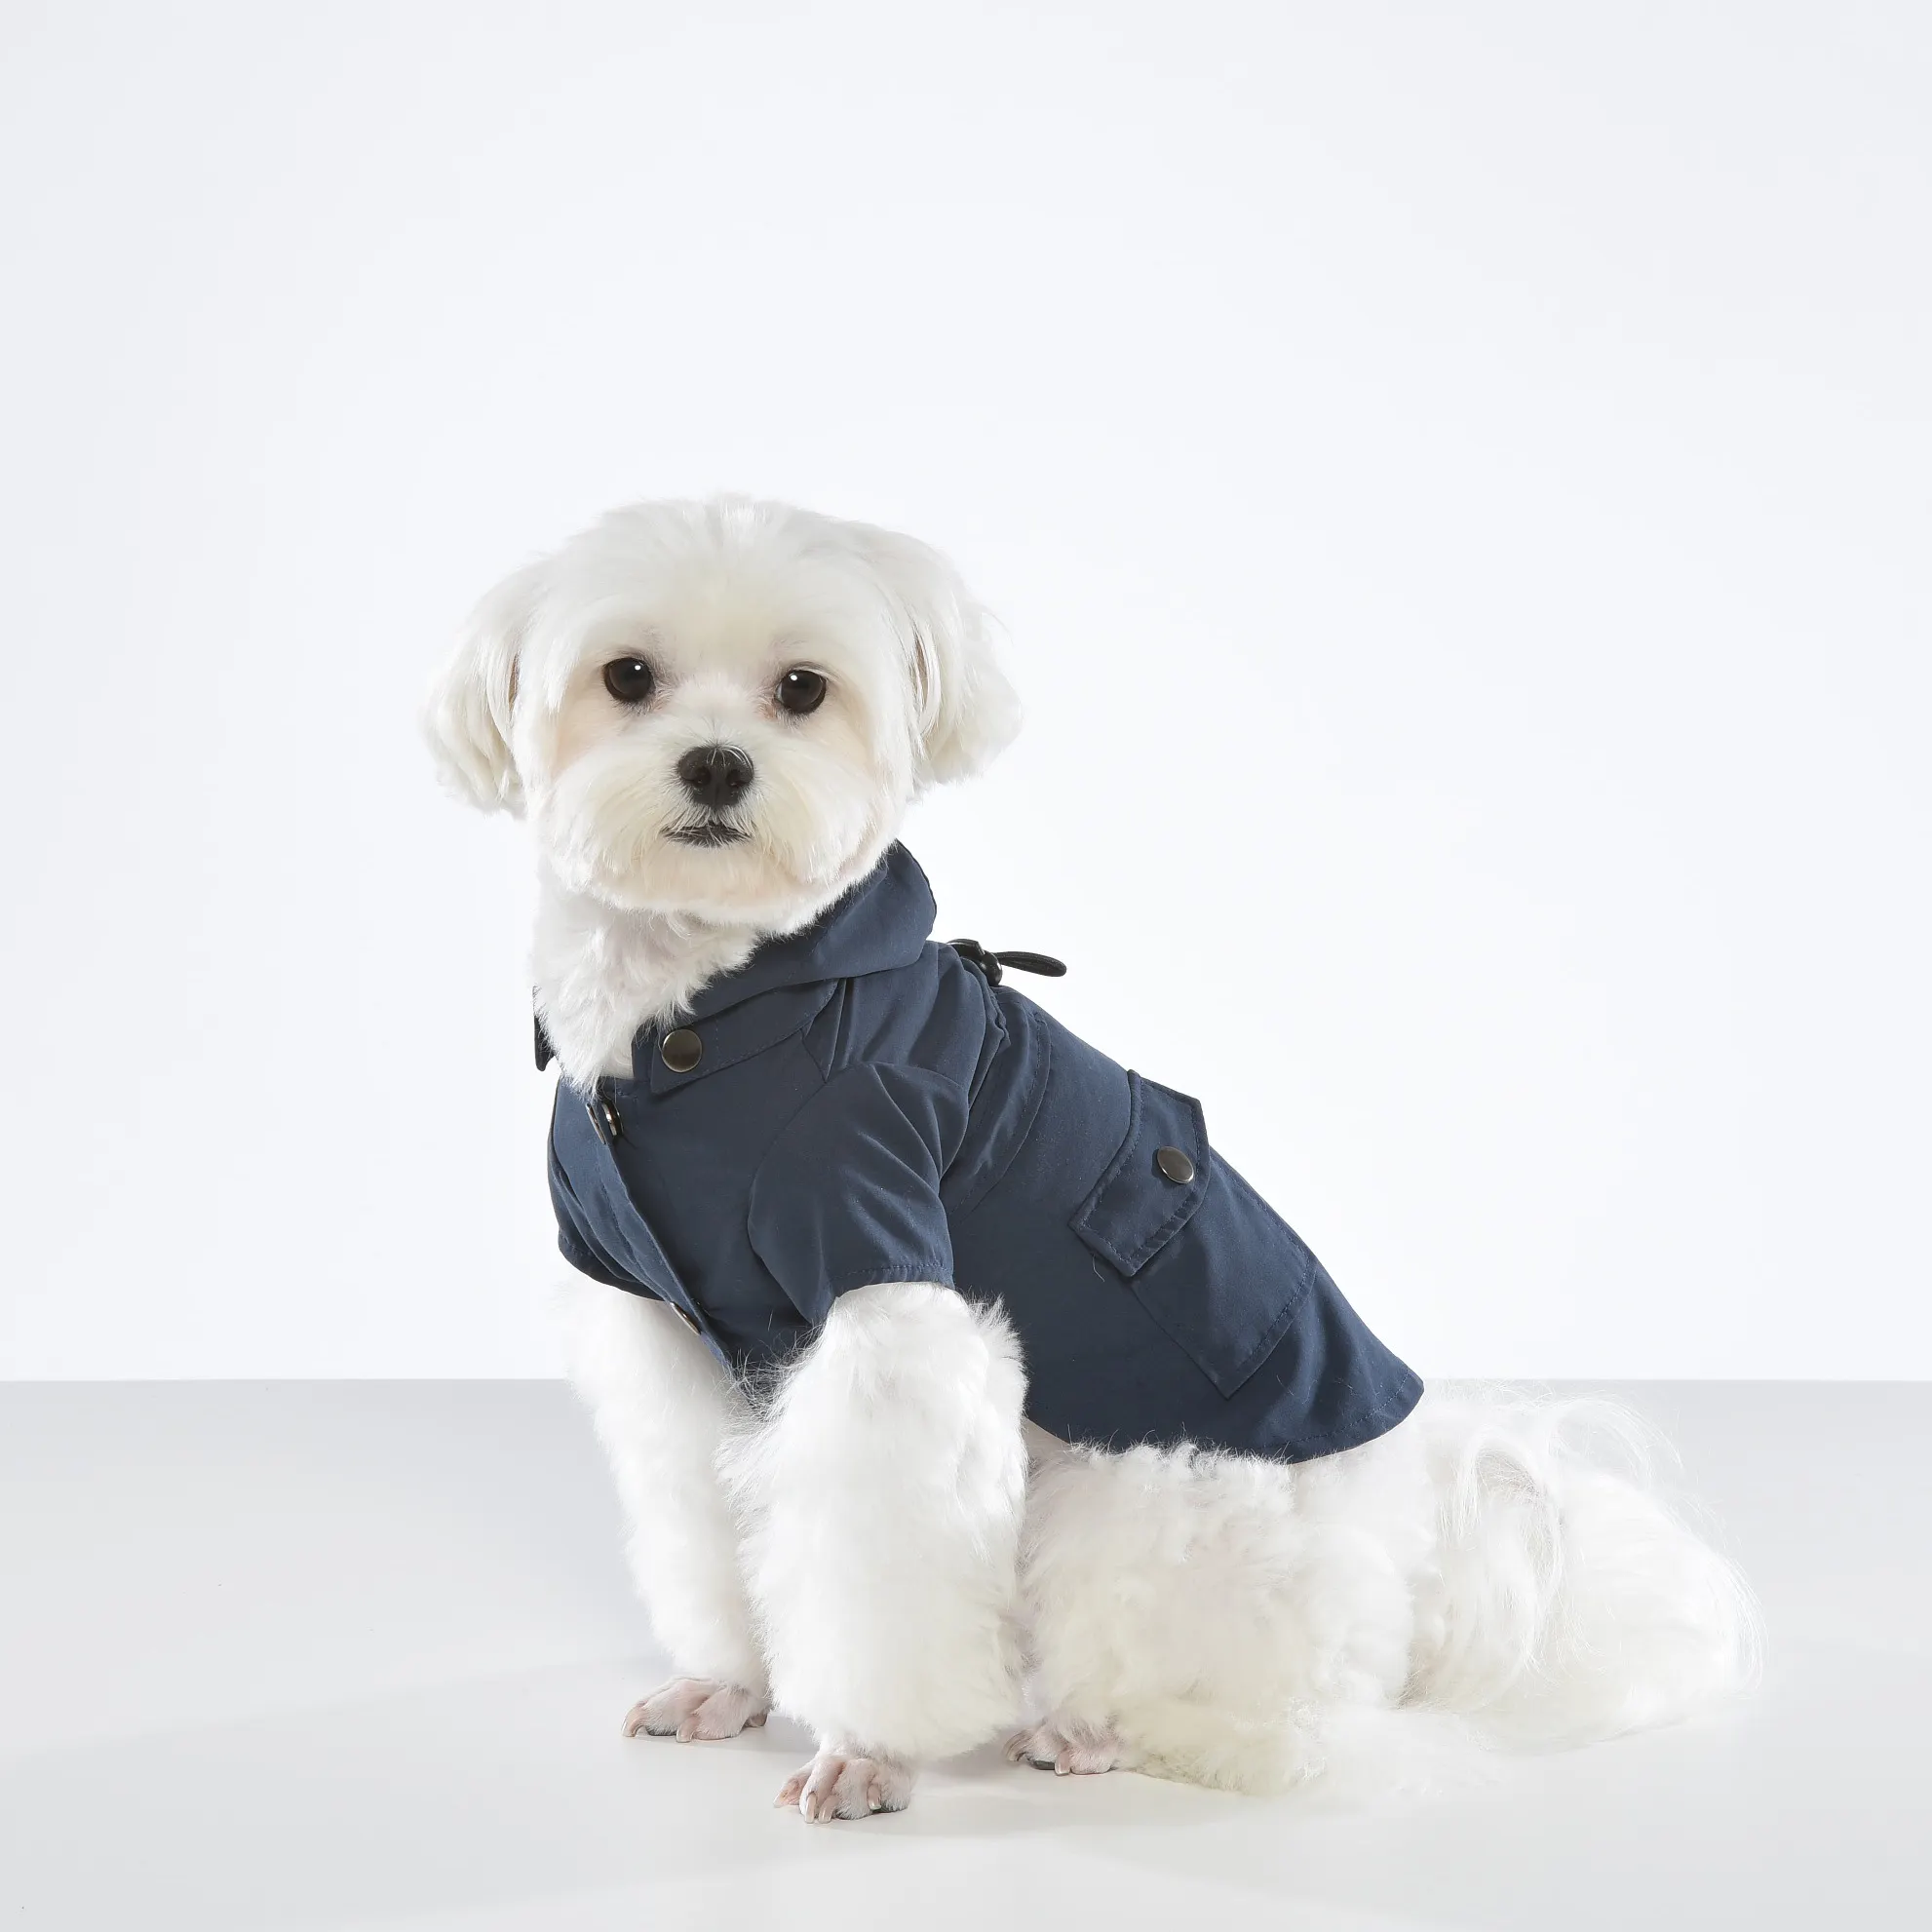 ODM windproof outdoor pet middle dog clothes with detachable hood